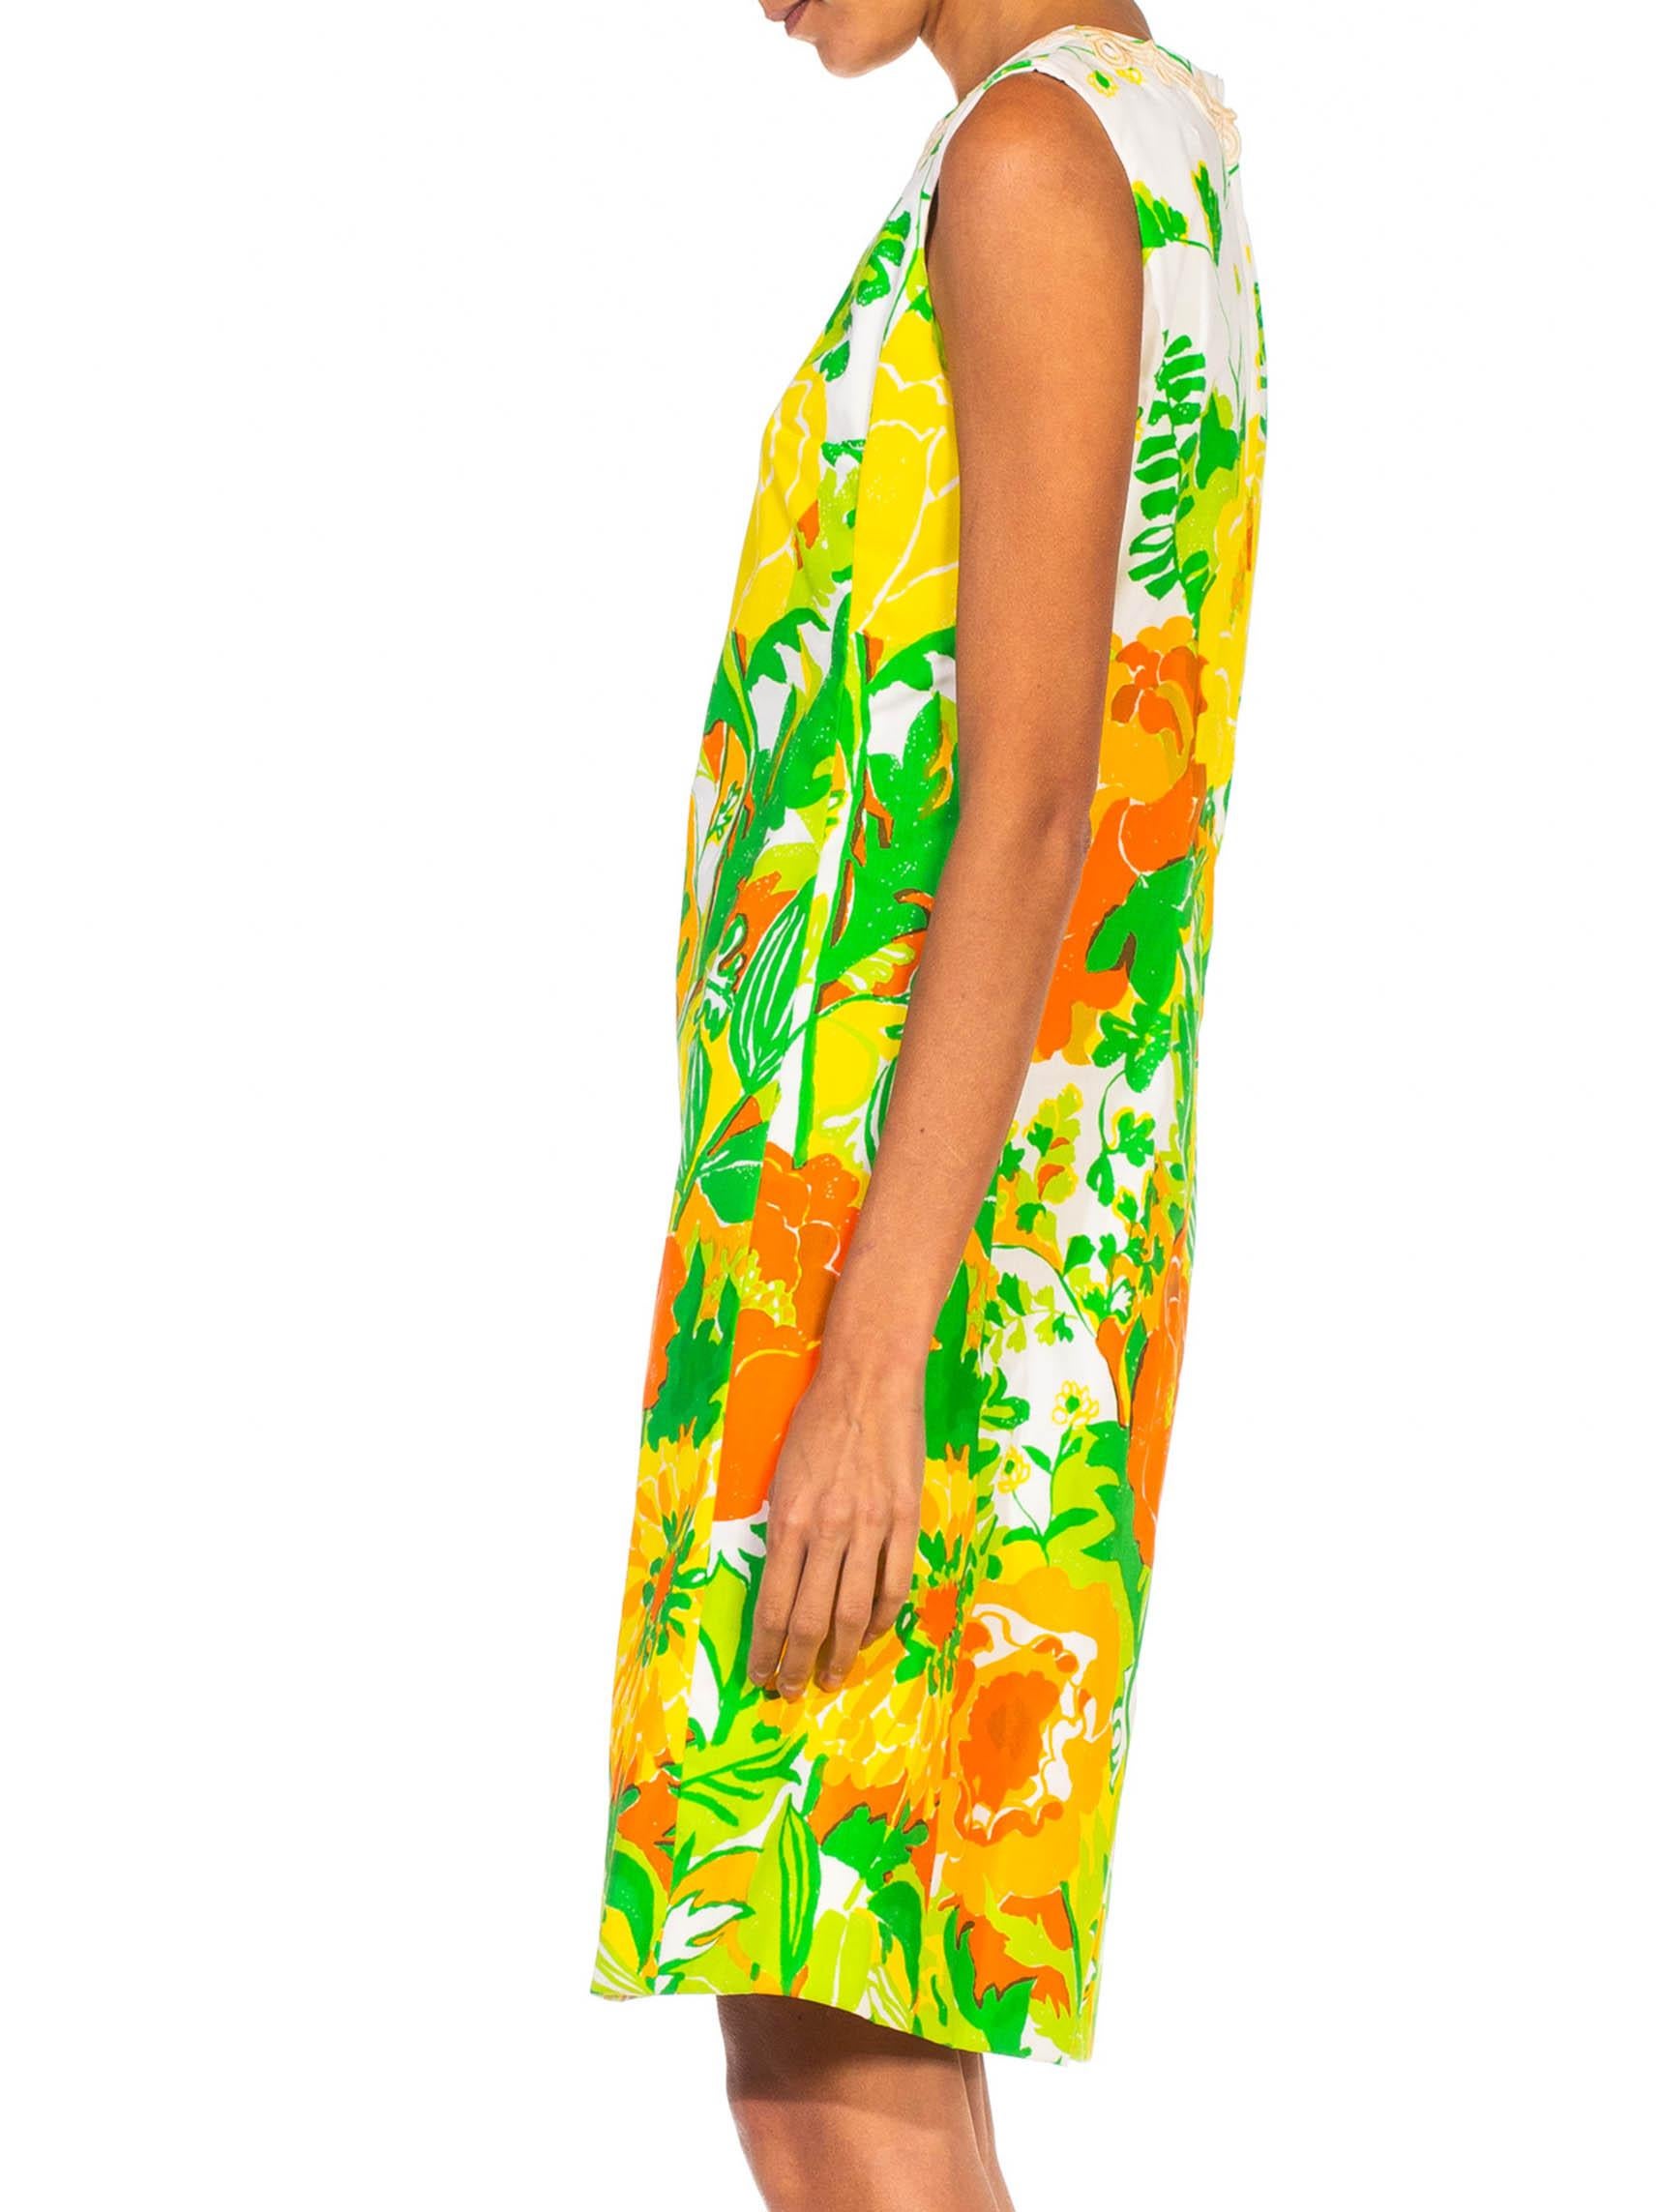 1960s lilly pulitzer dress